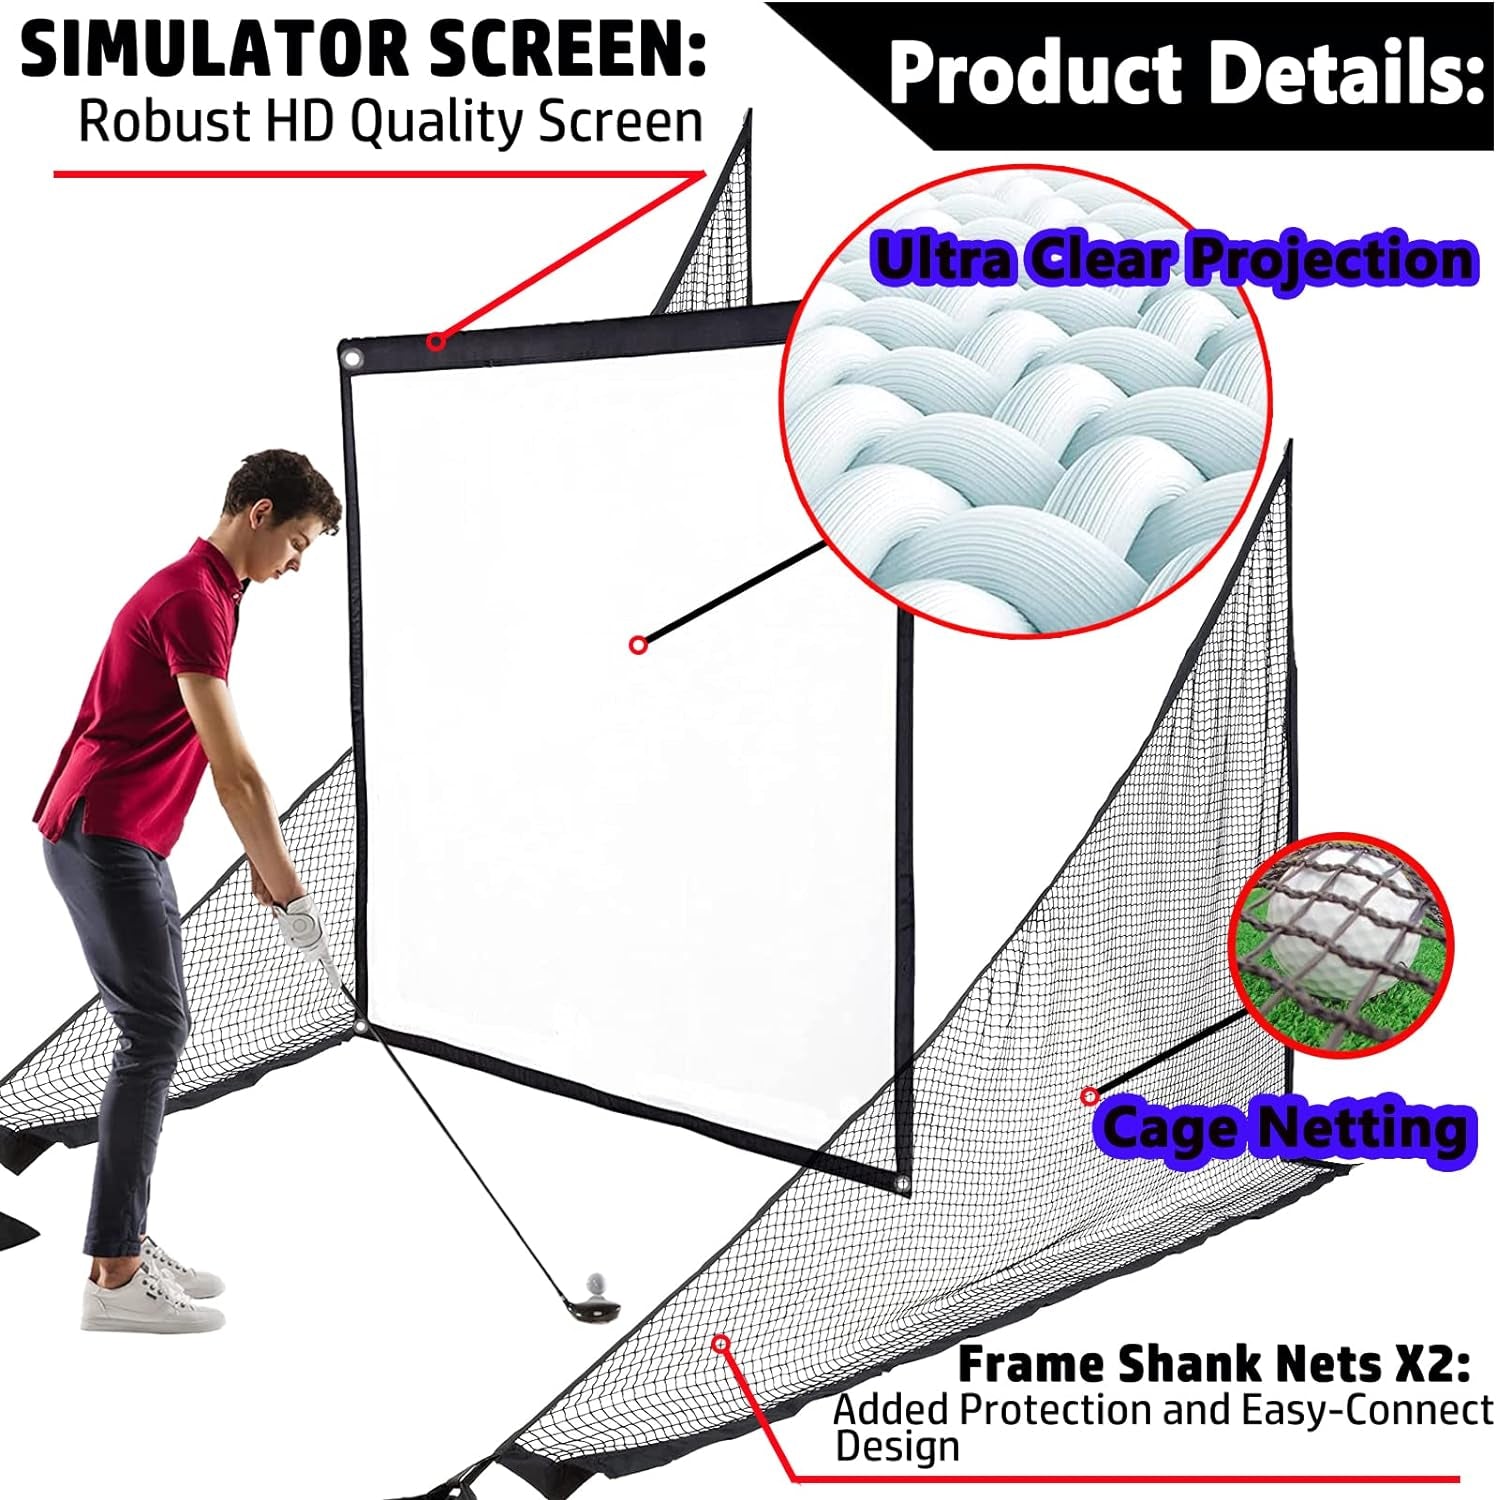 Golf Simulator Impact Screens Installed on Golf Hitting Net Frame- Sim Ball Simulator Impact Display Projection Screen with 10Pcs Grommet Ropes for Outdoor/Indoor/Home